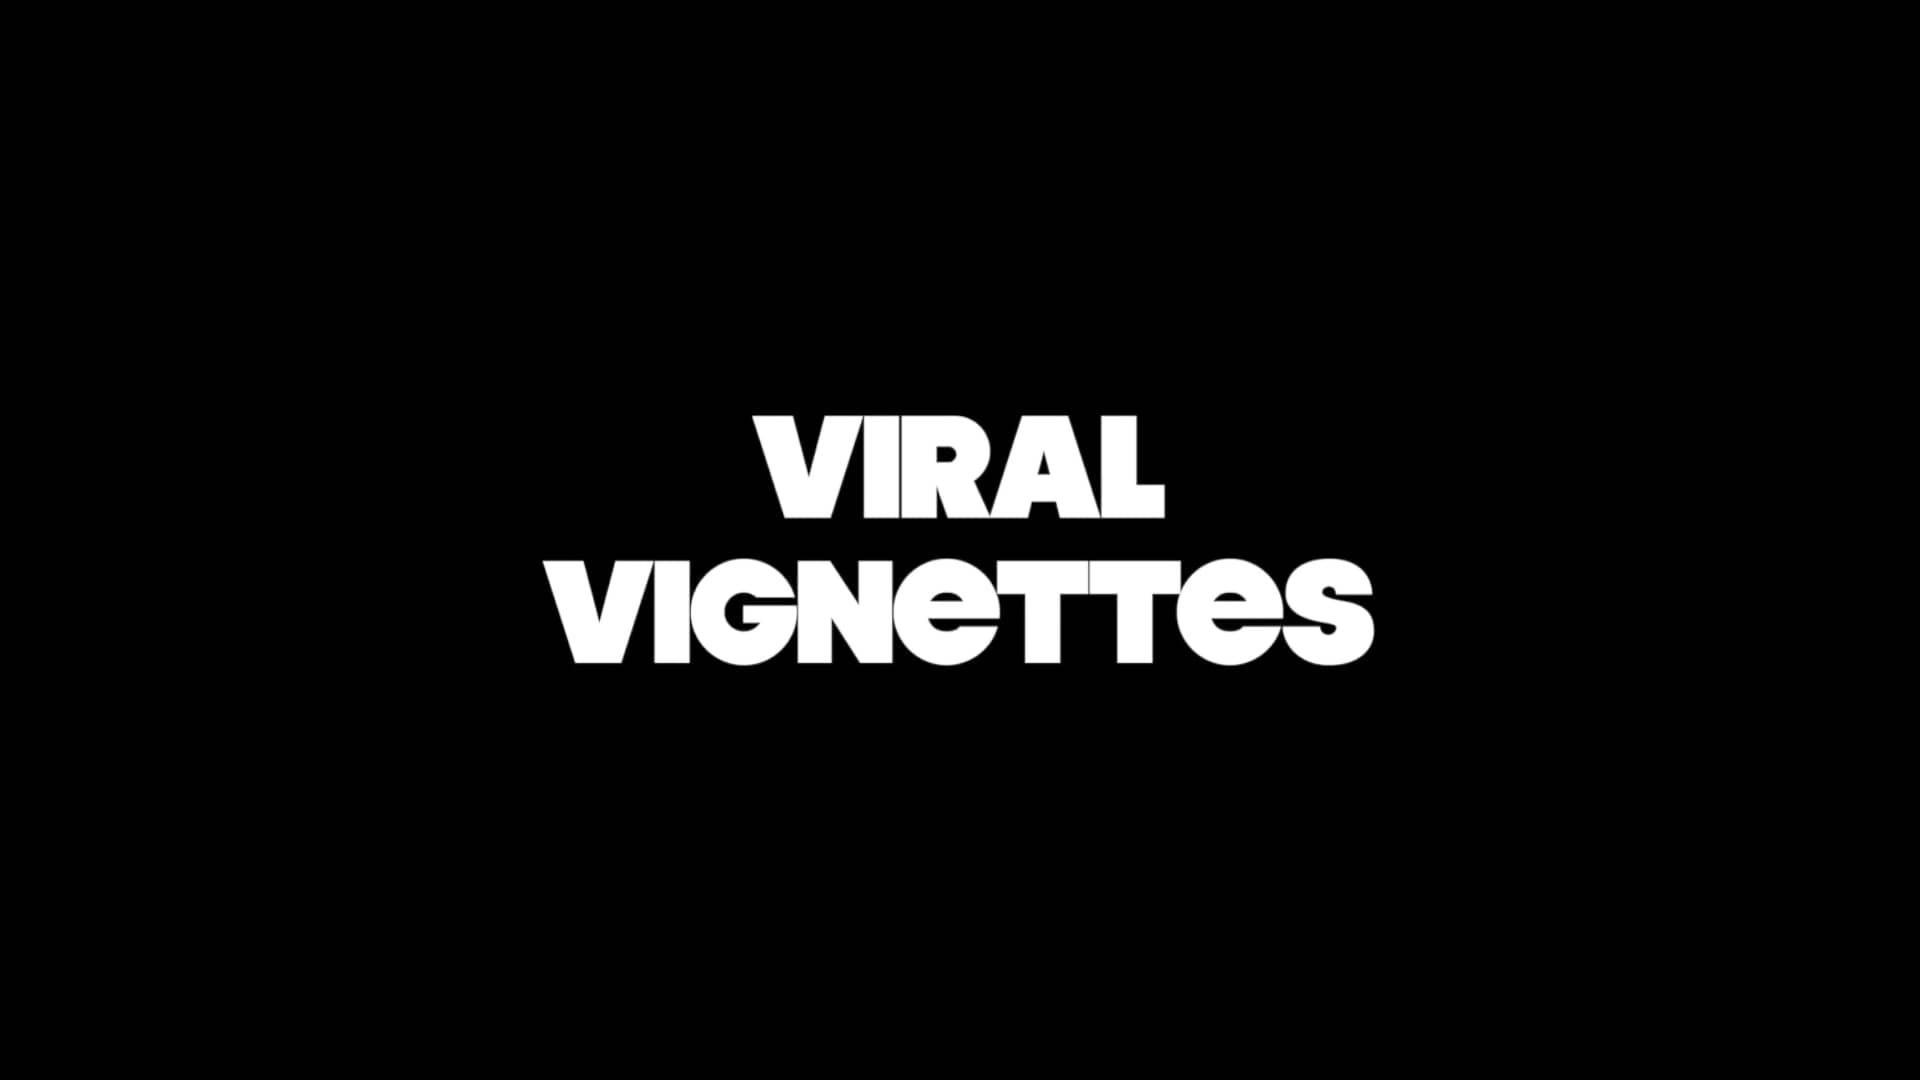 Viral Vignettes The Feature Length Movie - Credit Sequence.mov on Vimeo